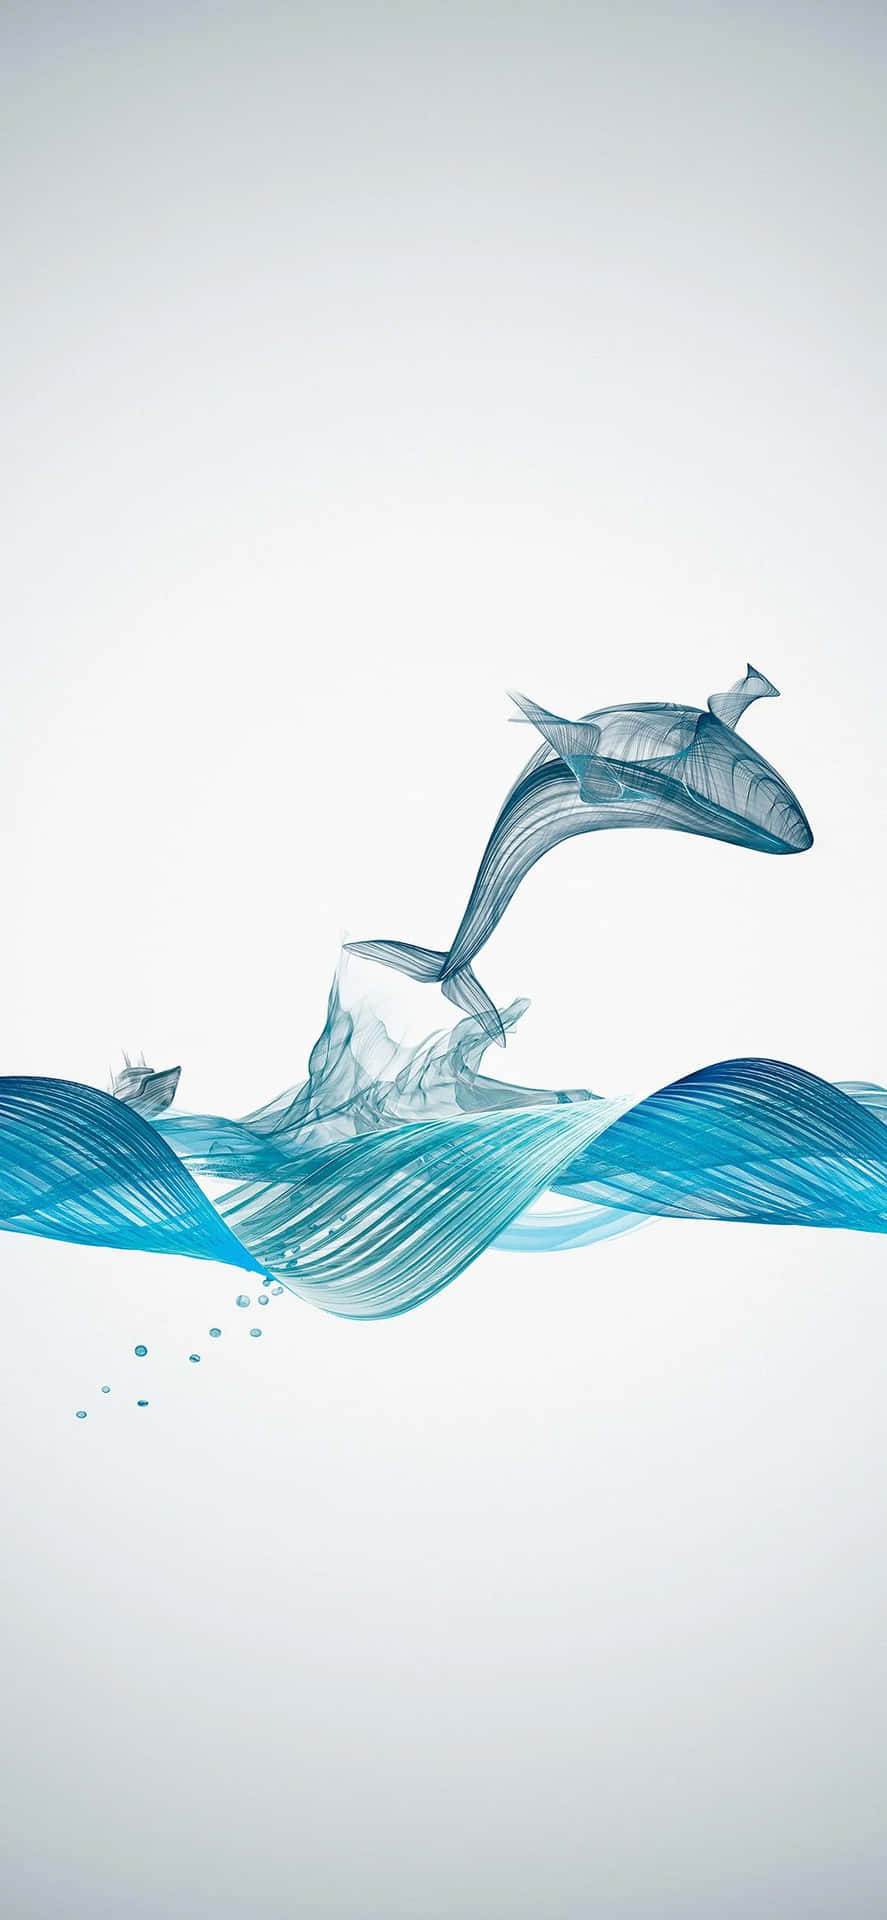 Abstract Dolphin Leaping Water Art Wallpaper